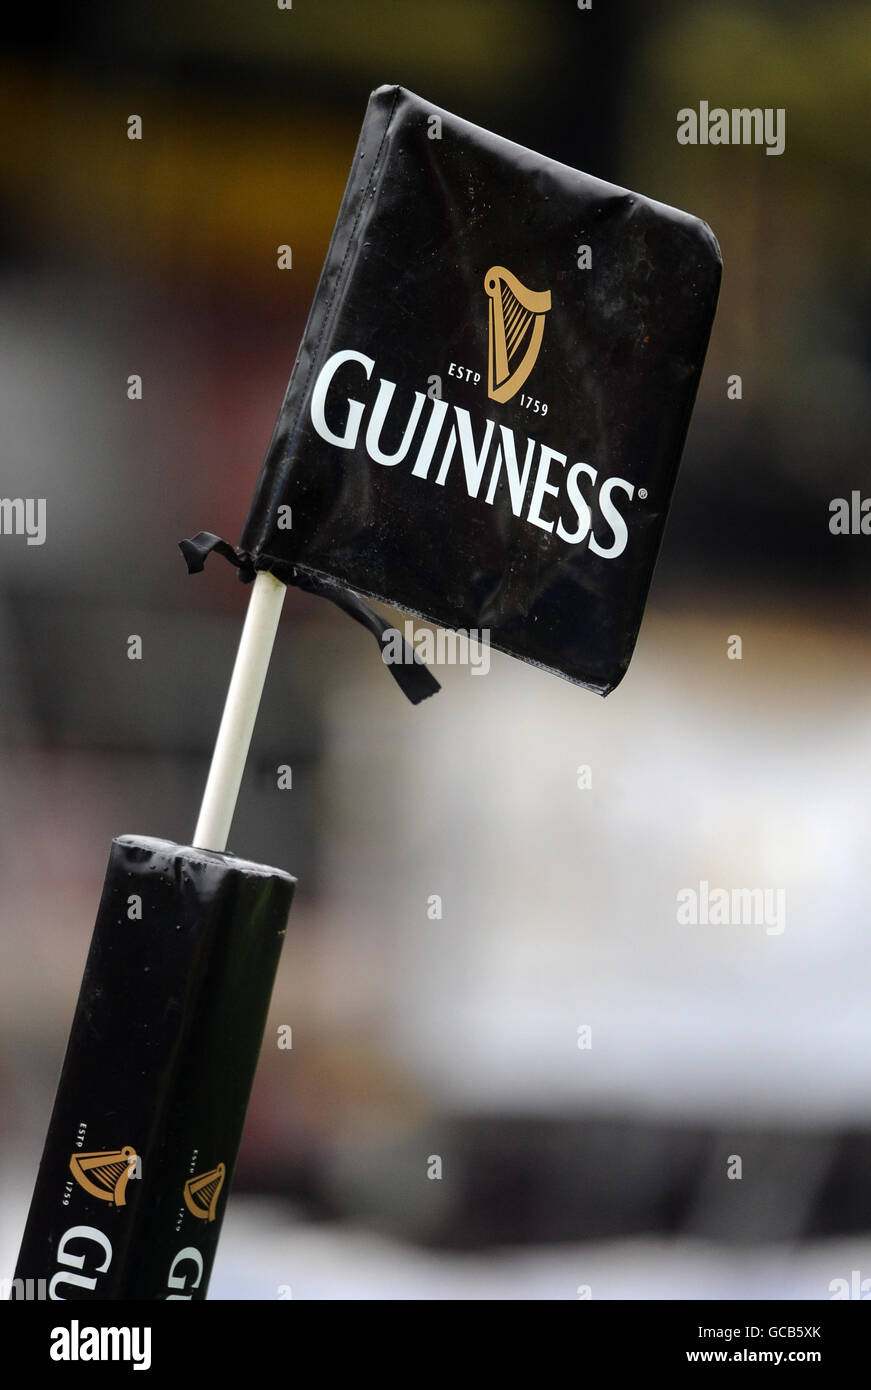 Rugby Union - Guinness Premiership - Saracens v Bath - Vicarage Road. Guinness signage during the Guinness Premiership round 16 match between Saracens and Bath Stock Photo